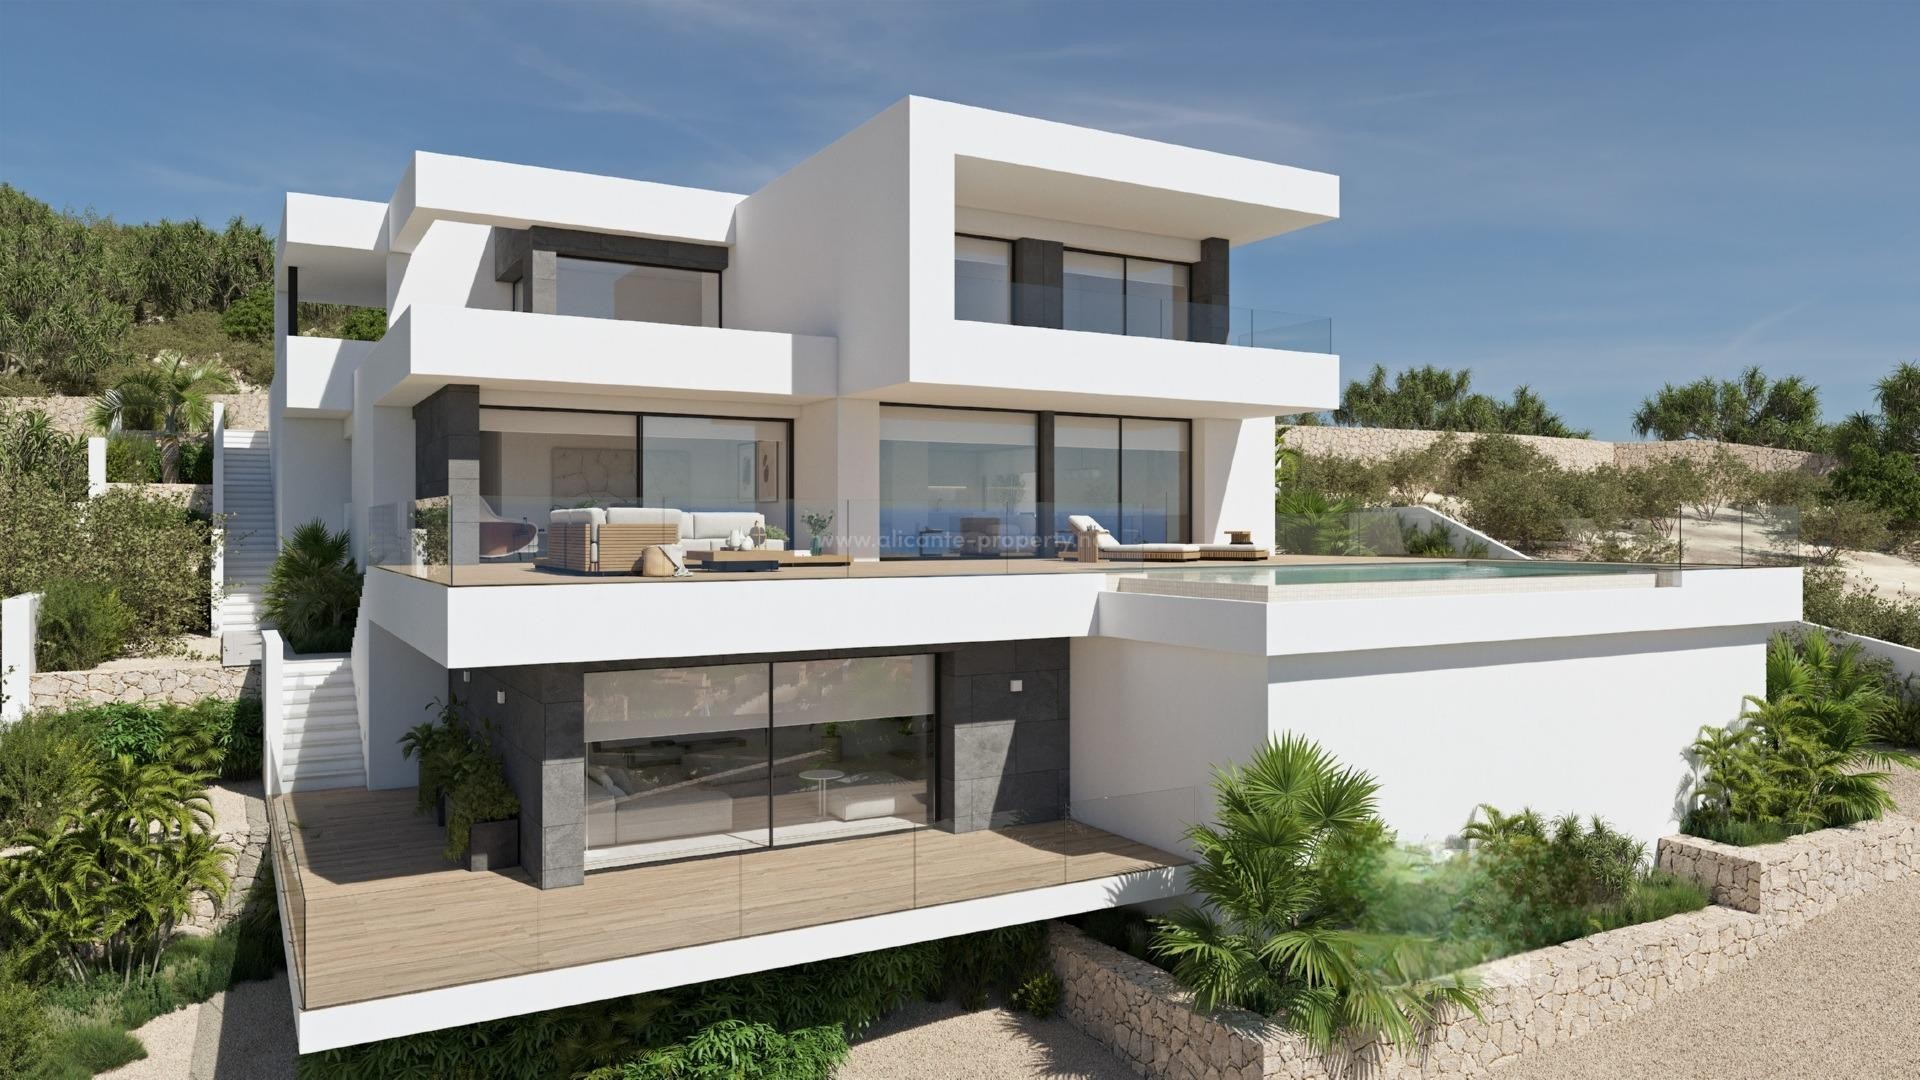 Cumbre del Sol with luxury villa with spectacular sea views, 3/4 bedrooms, 4 bathrooms, an extraordinary infinity pool on the terrace, basement